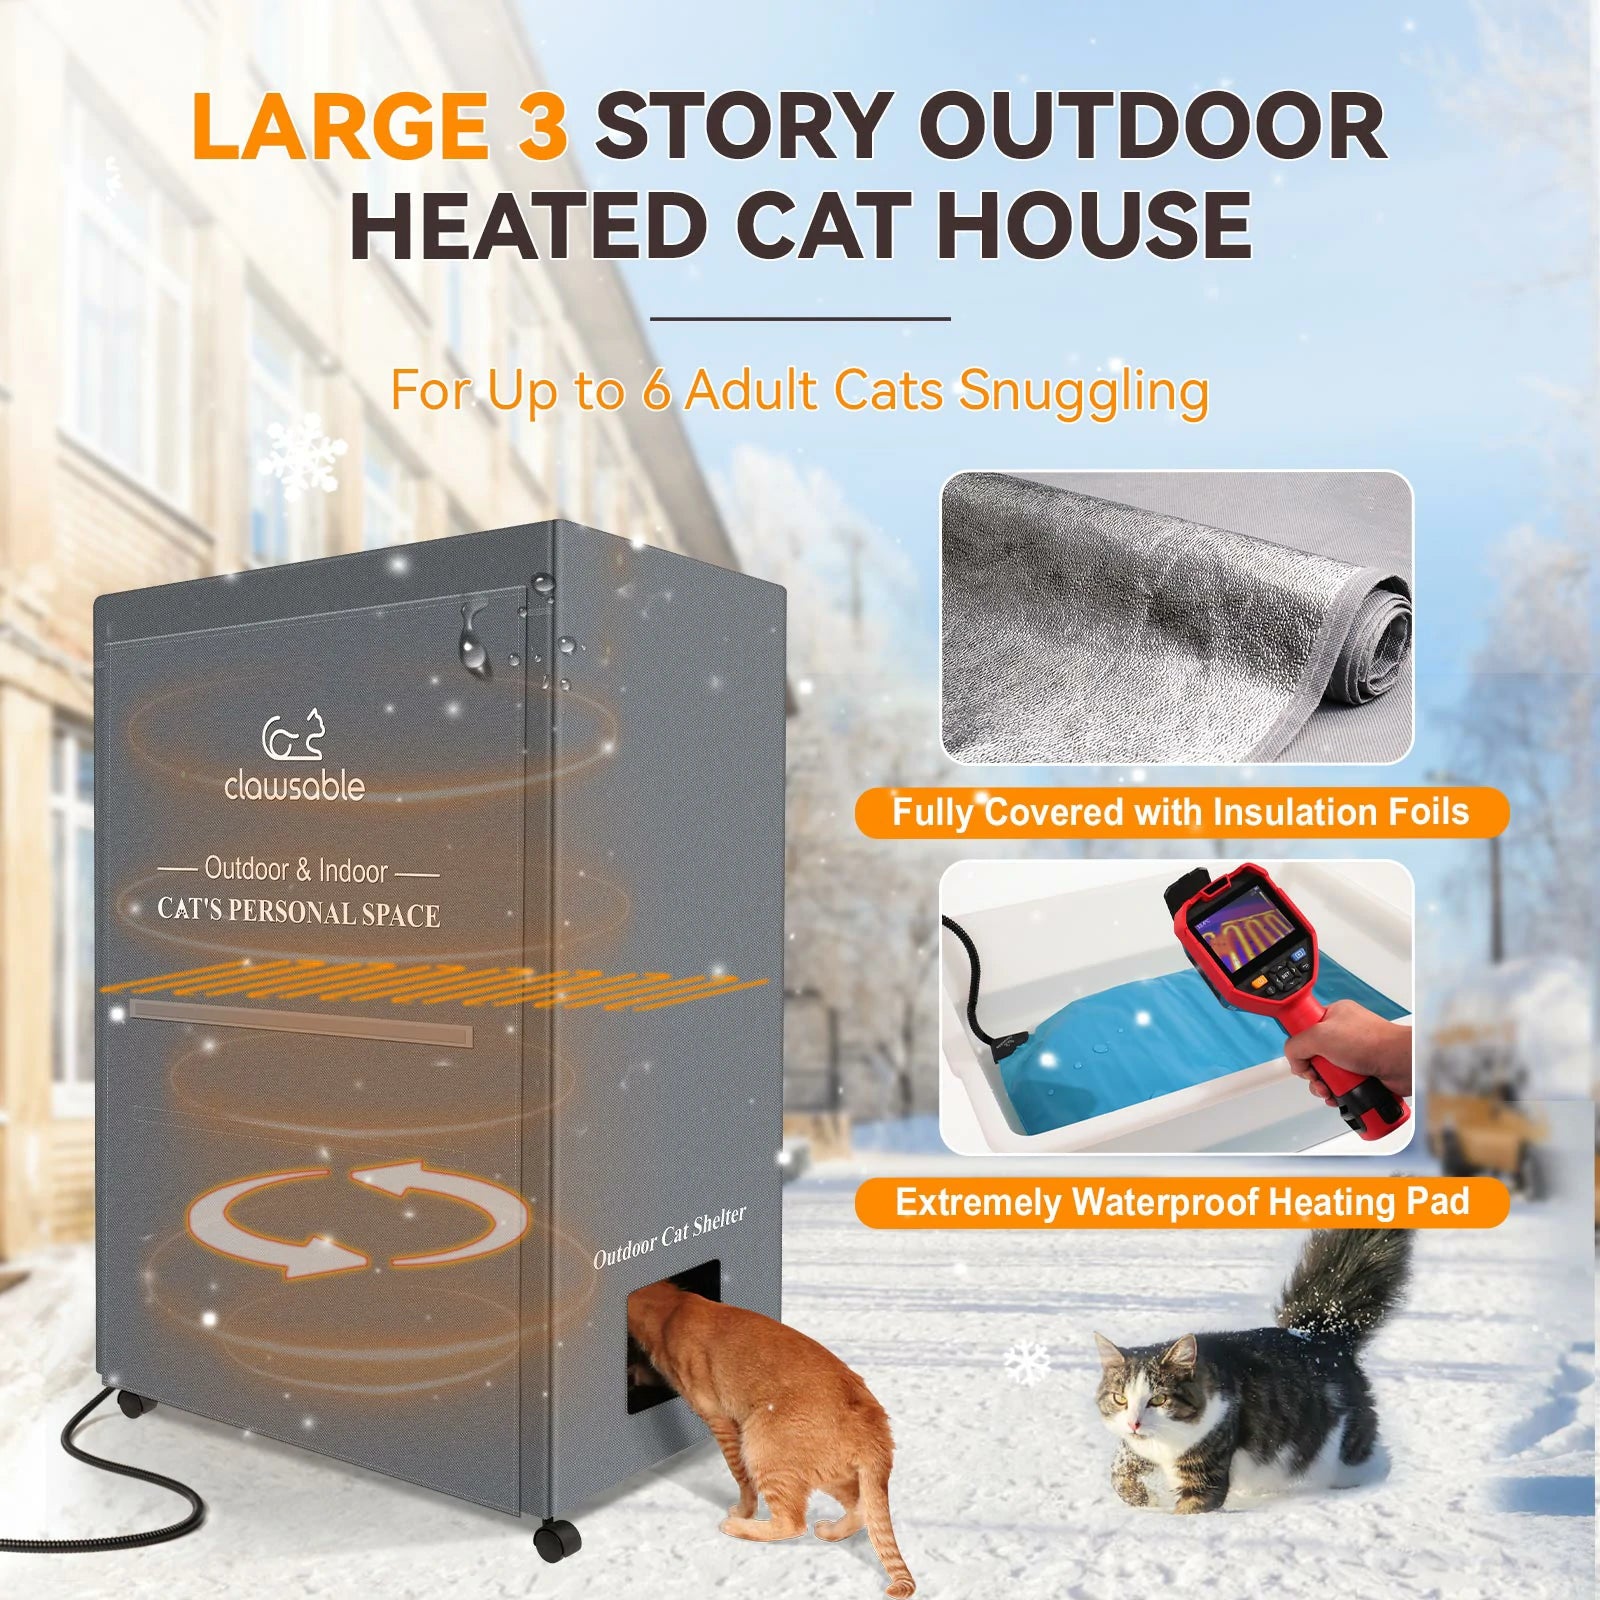 large 3 story outdoor heated cat house